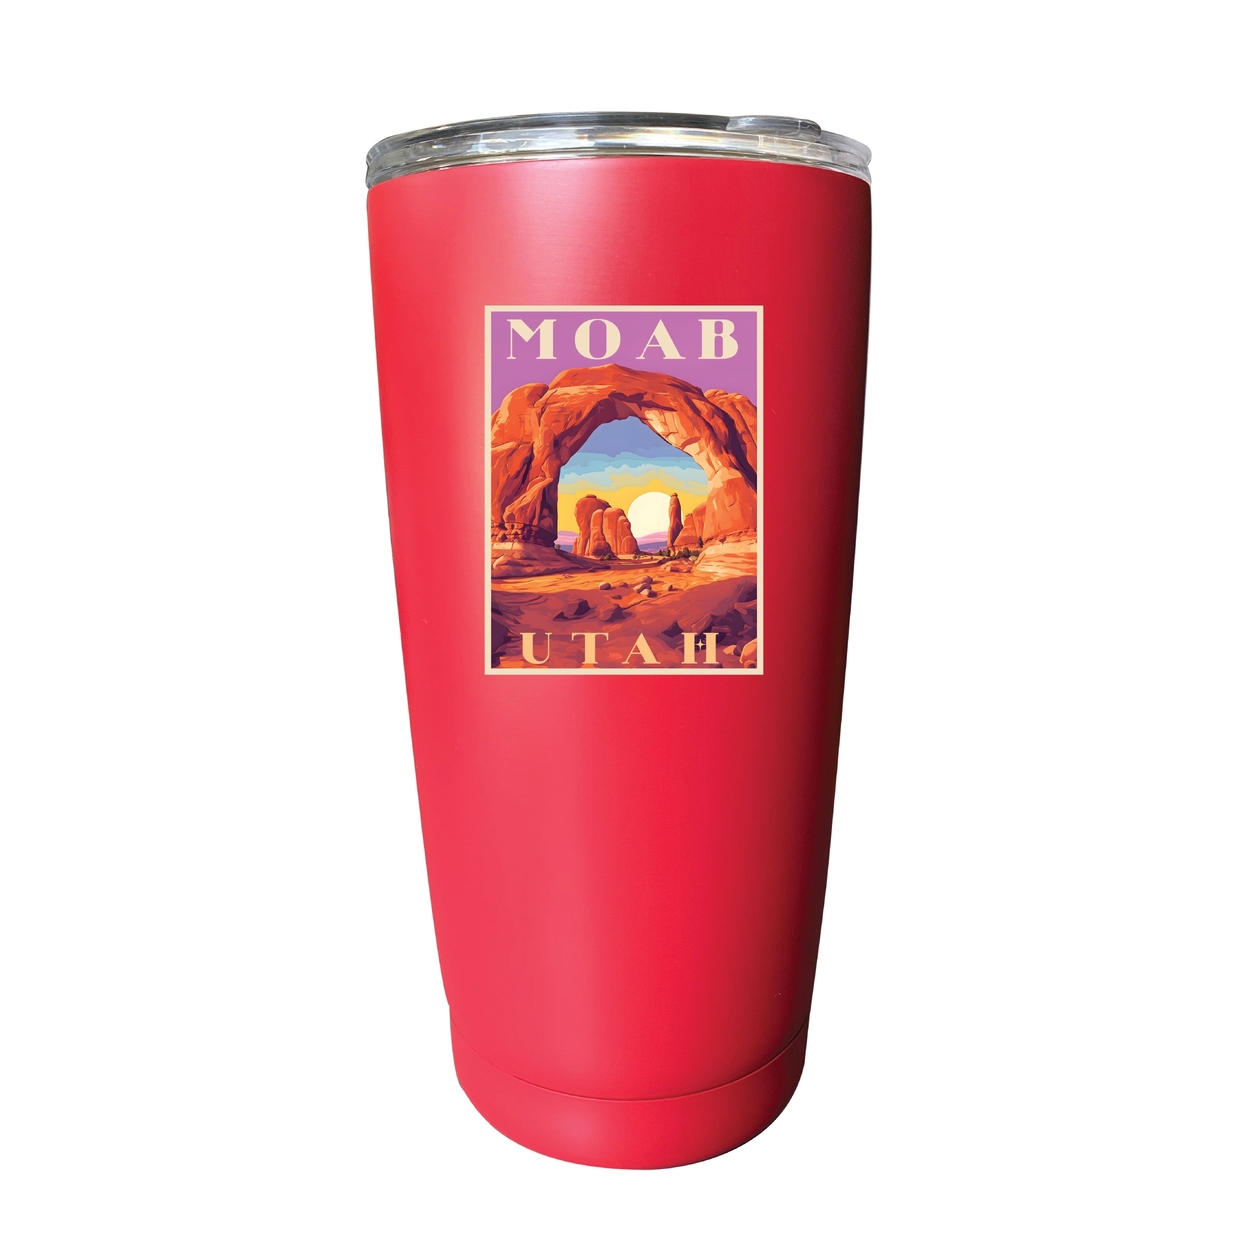 Moab Utah Souvenir 16 Oz Stainless Steel Insulated Tumbler - Red,,4-Pack